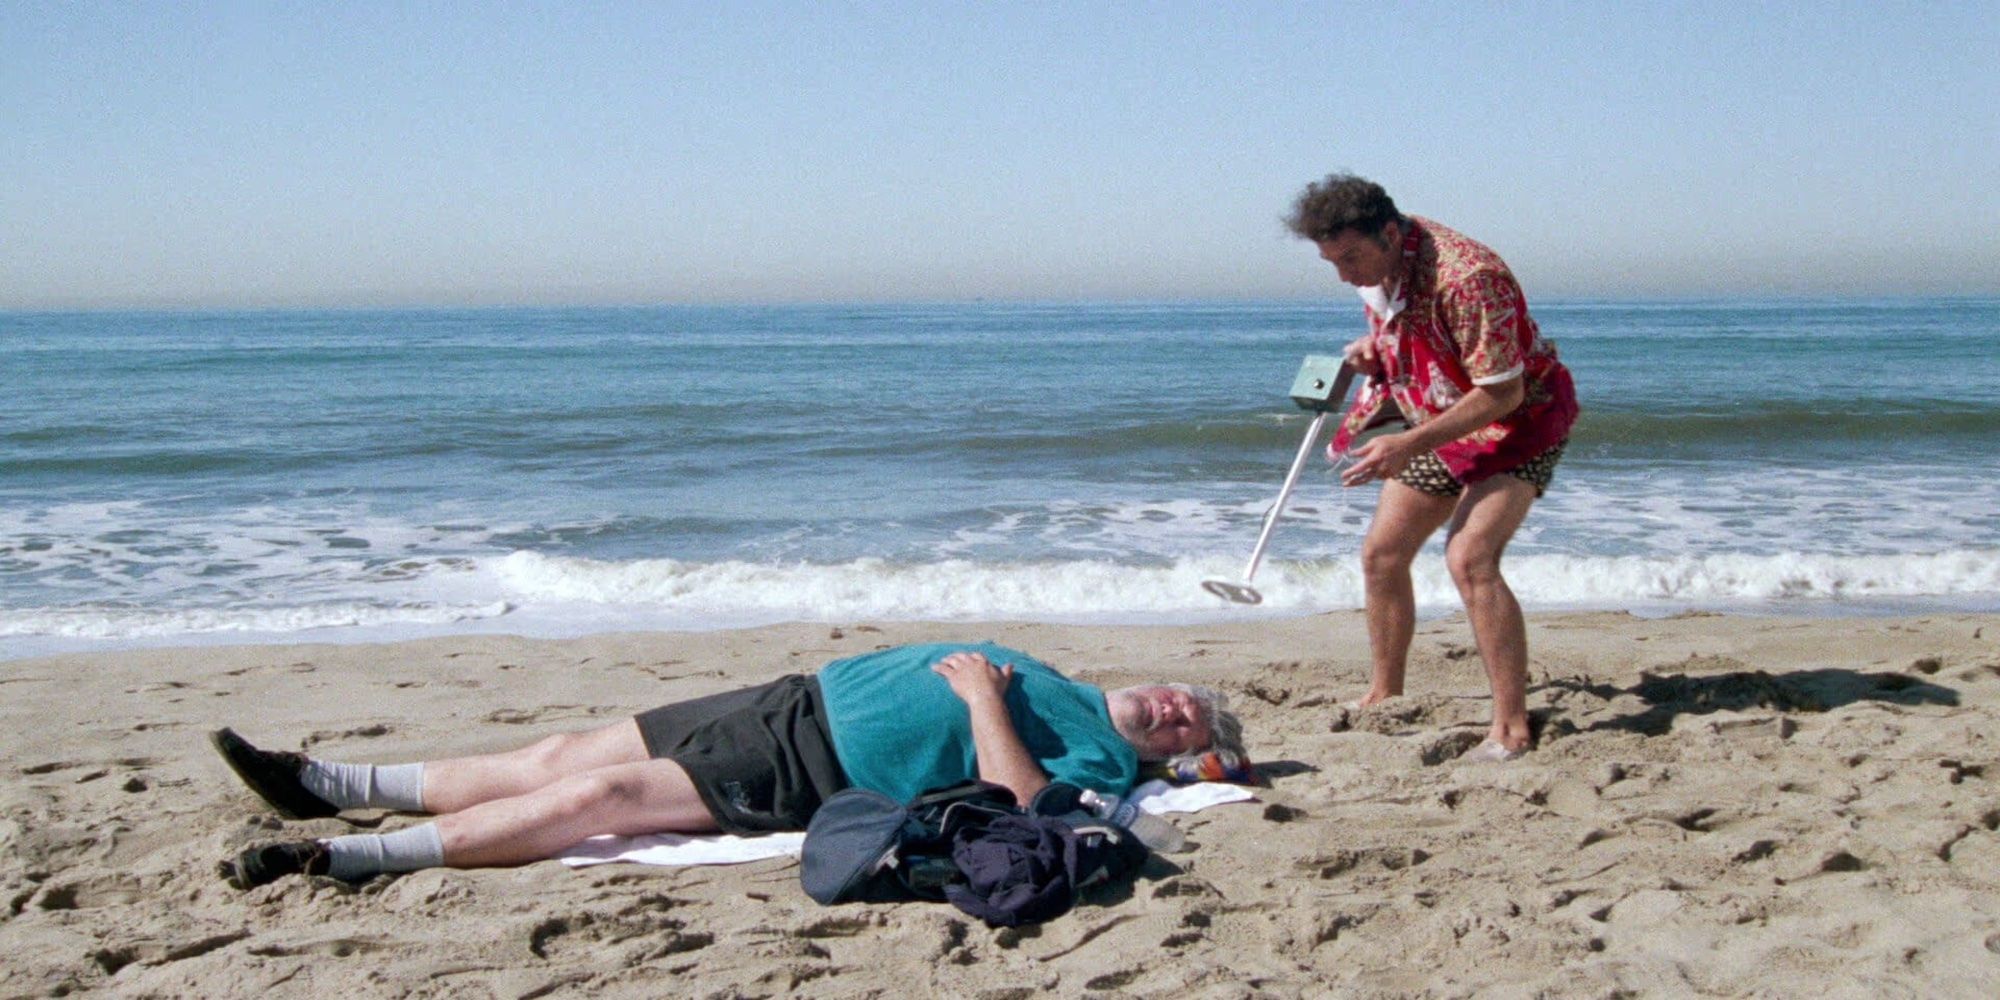 Kramer, played by Michael Richards, encounters a sleeping man on the beach